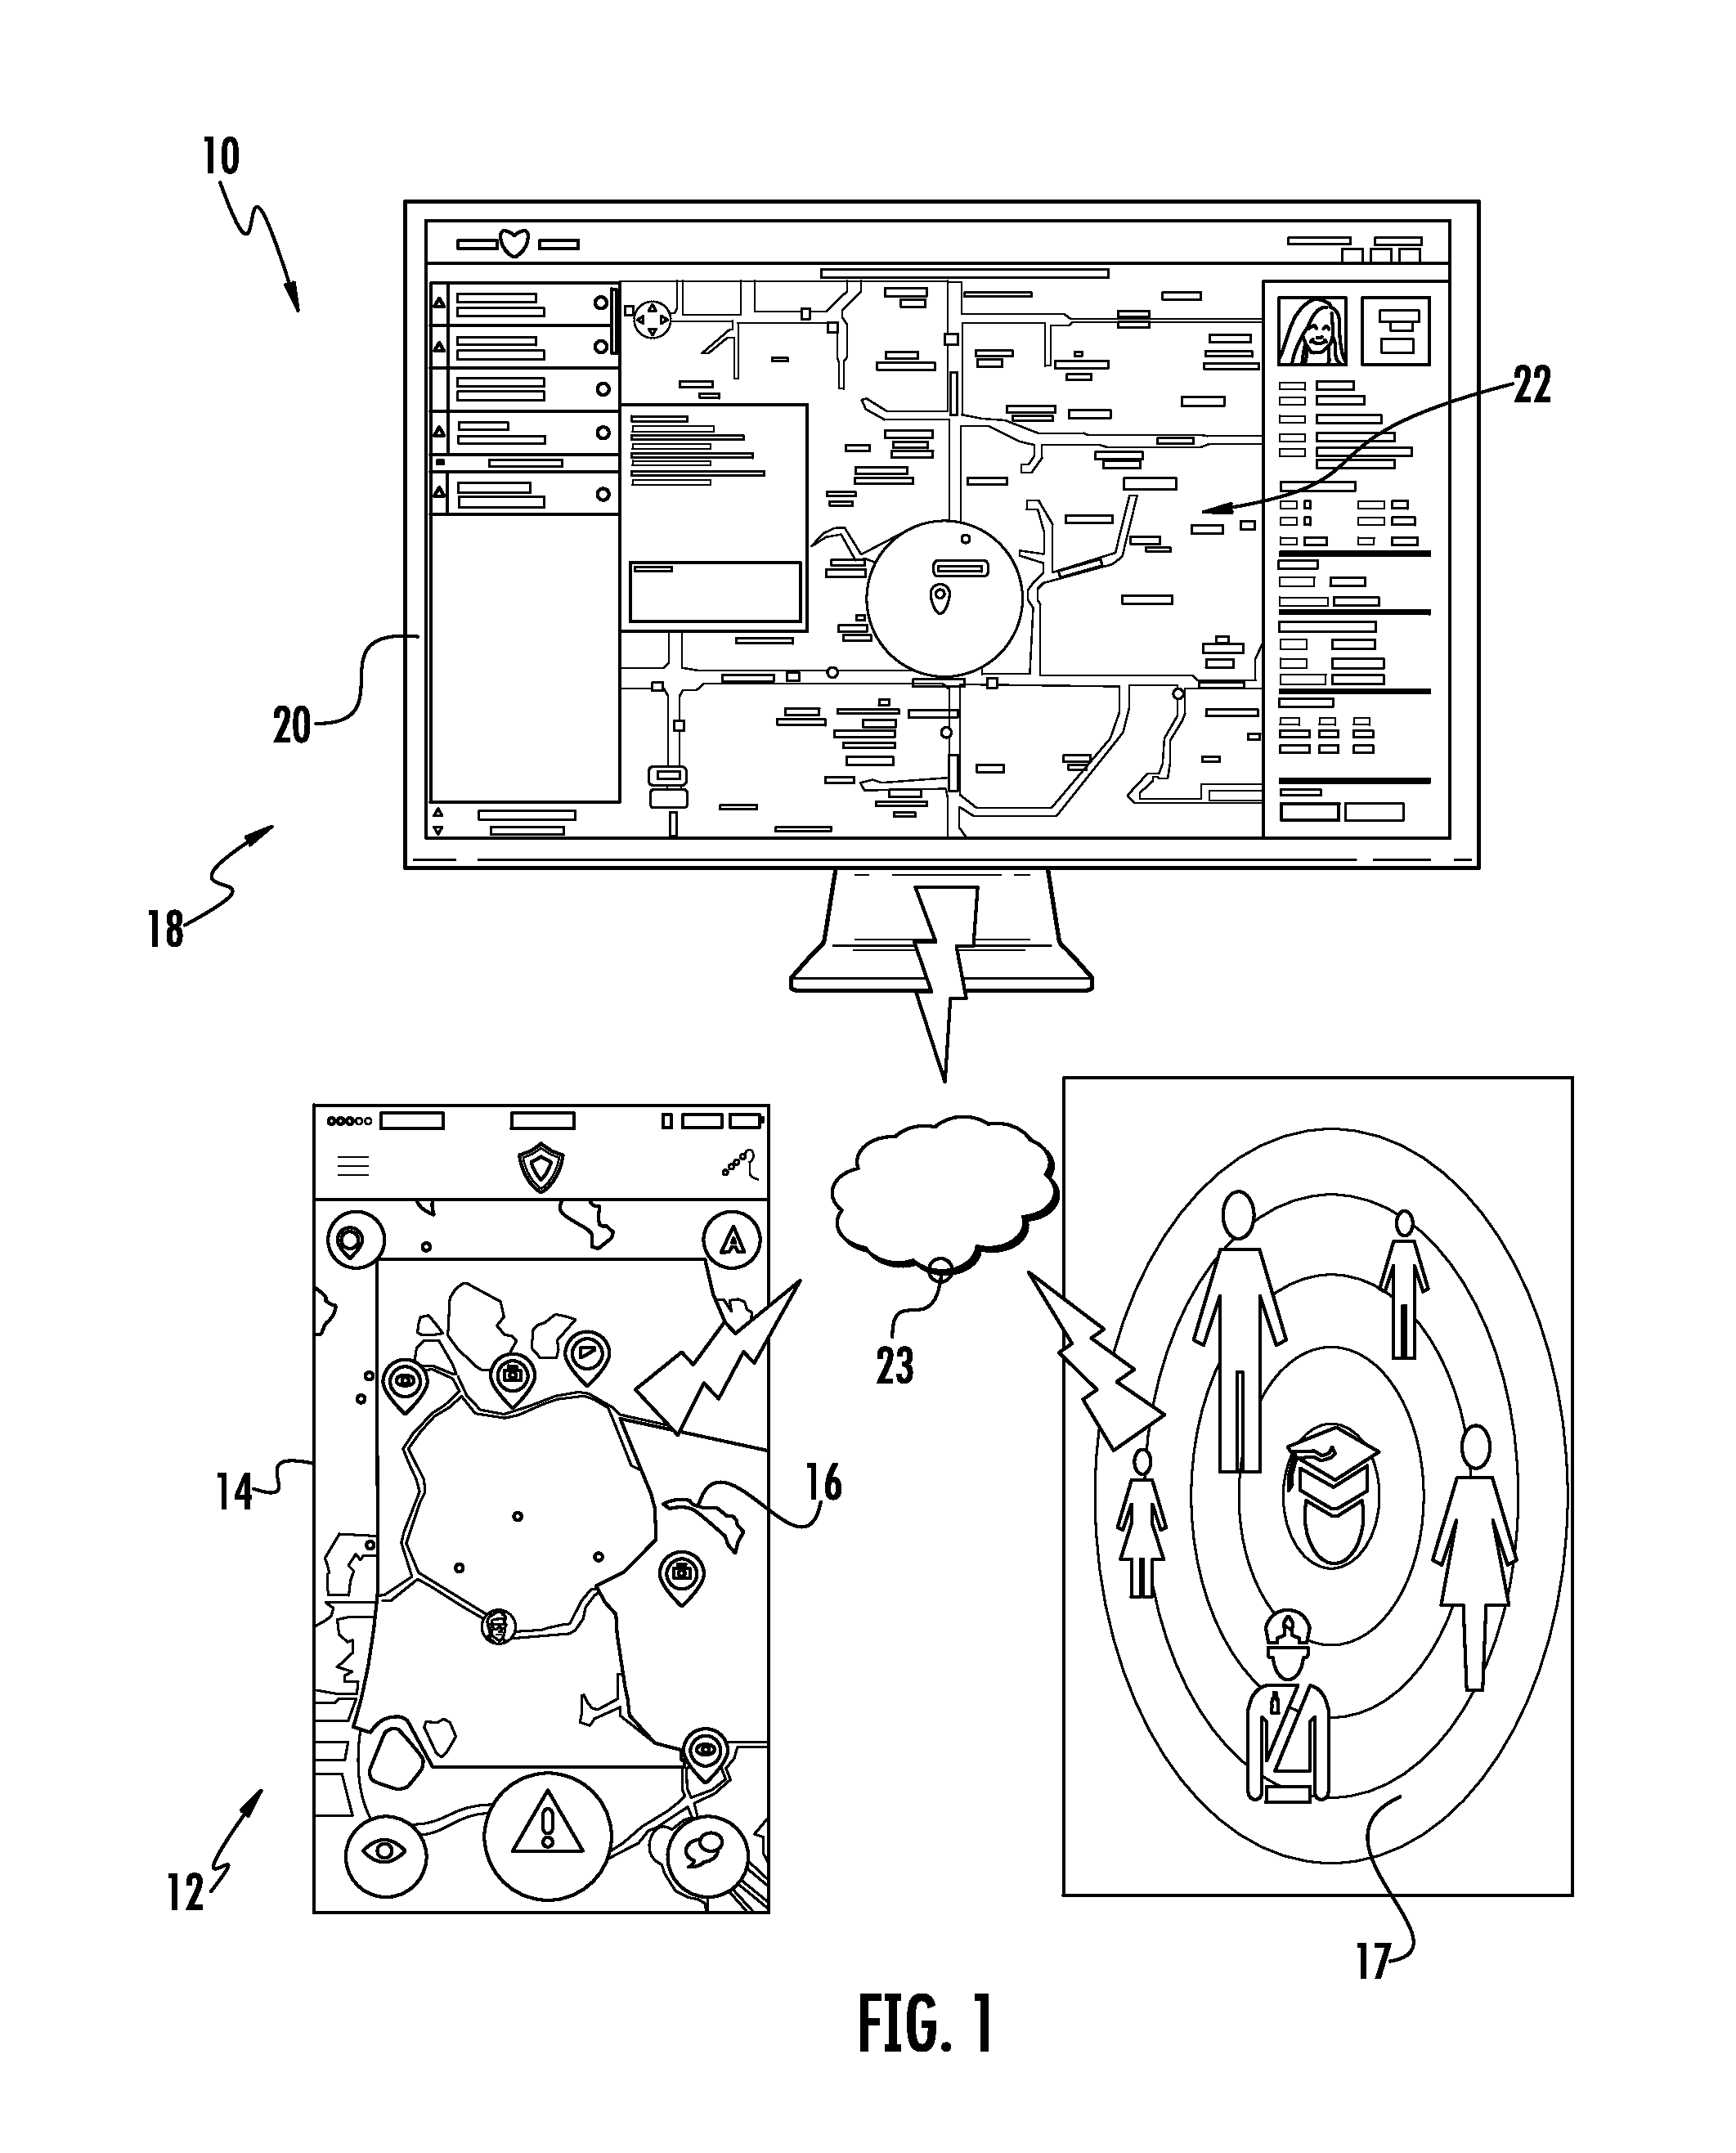 System and method for signaling and responding to an emergency situation